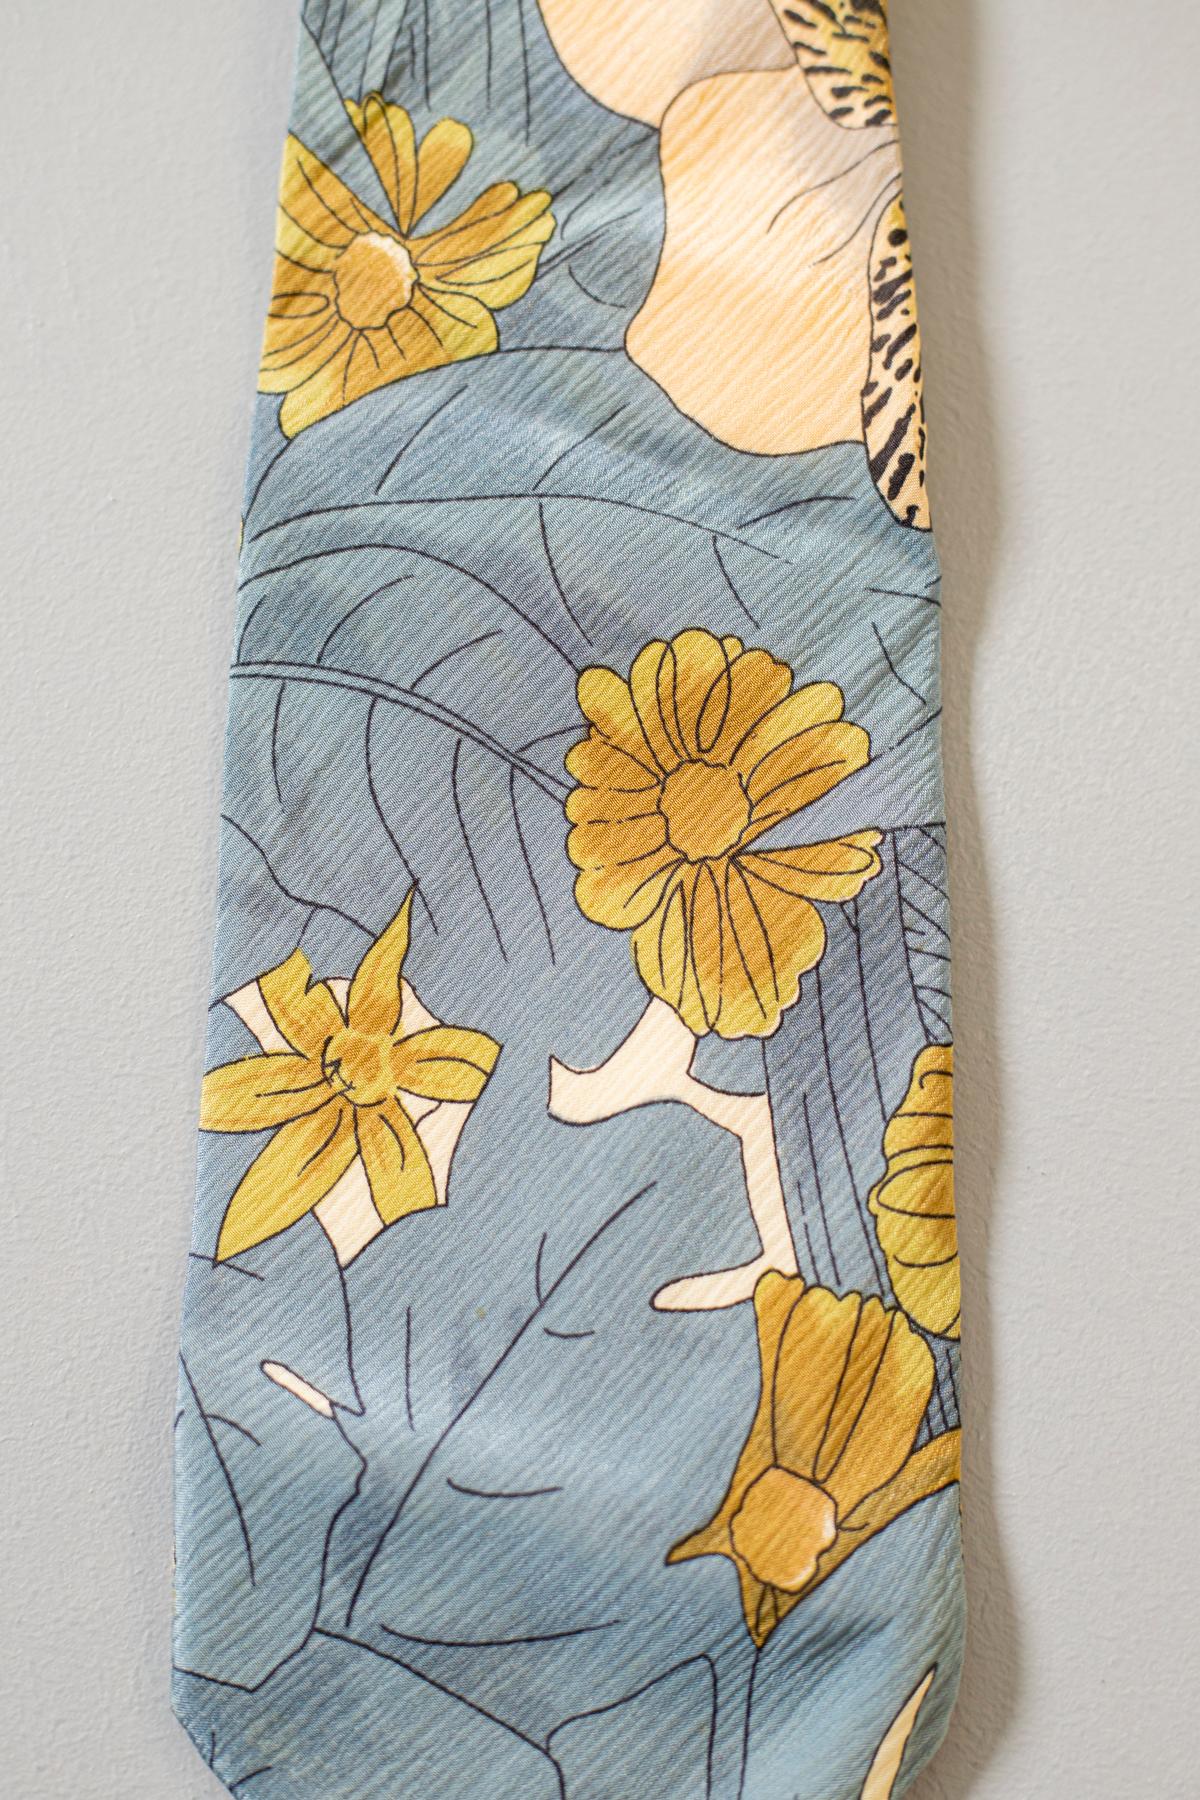 Made in Italy and designed by the French stylist Guv Laroche, this tie is classy and fine. It is decorated with yellow flowers and blue leaves on a beige background. This all-silk tie is fresh and perfect for an elegant occasion or for a quiet